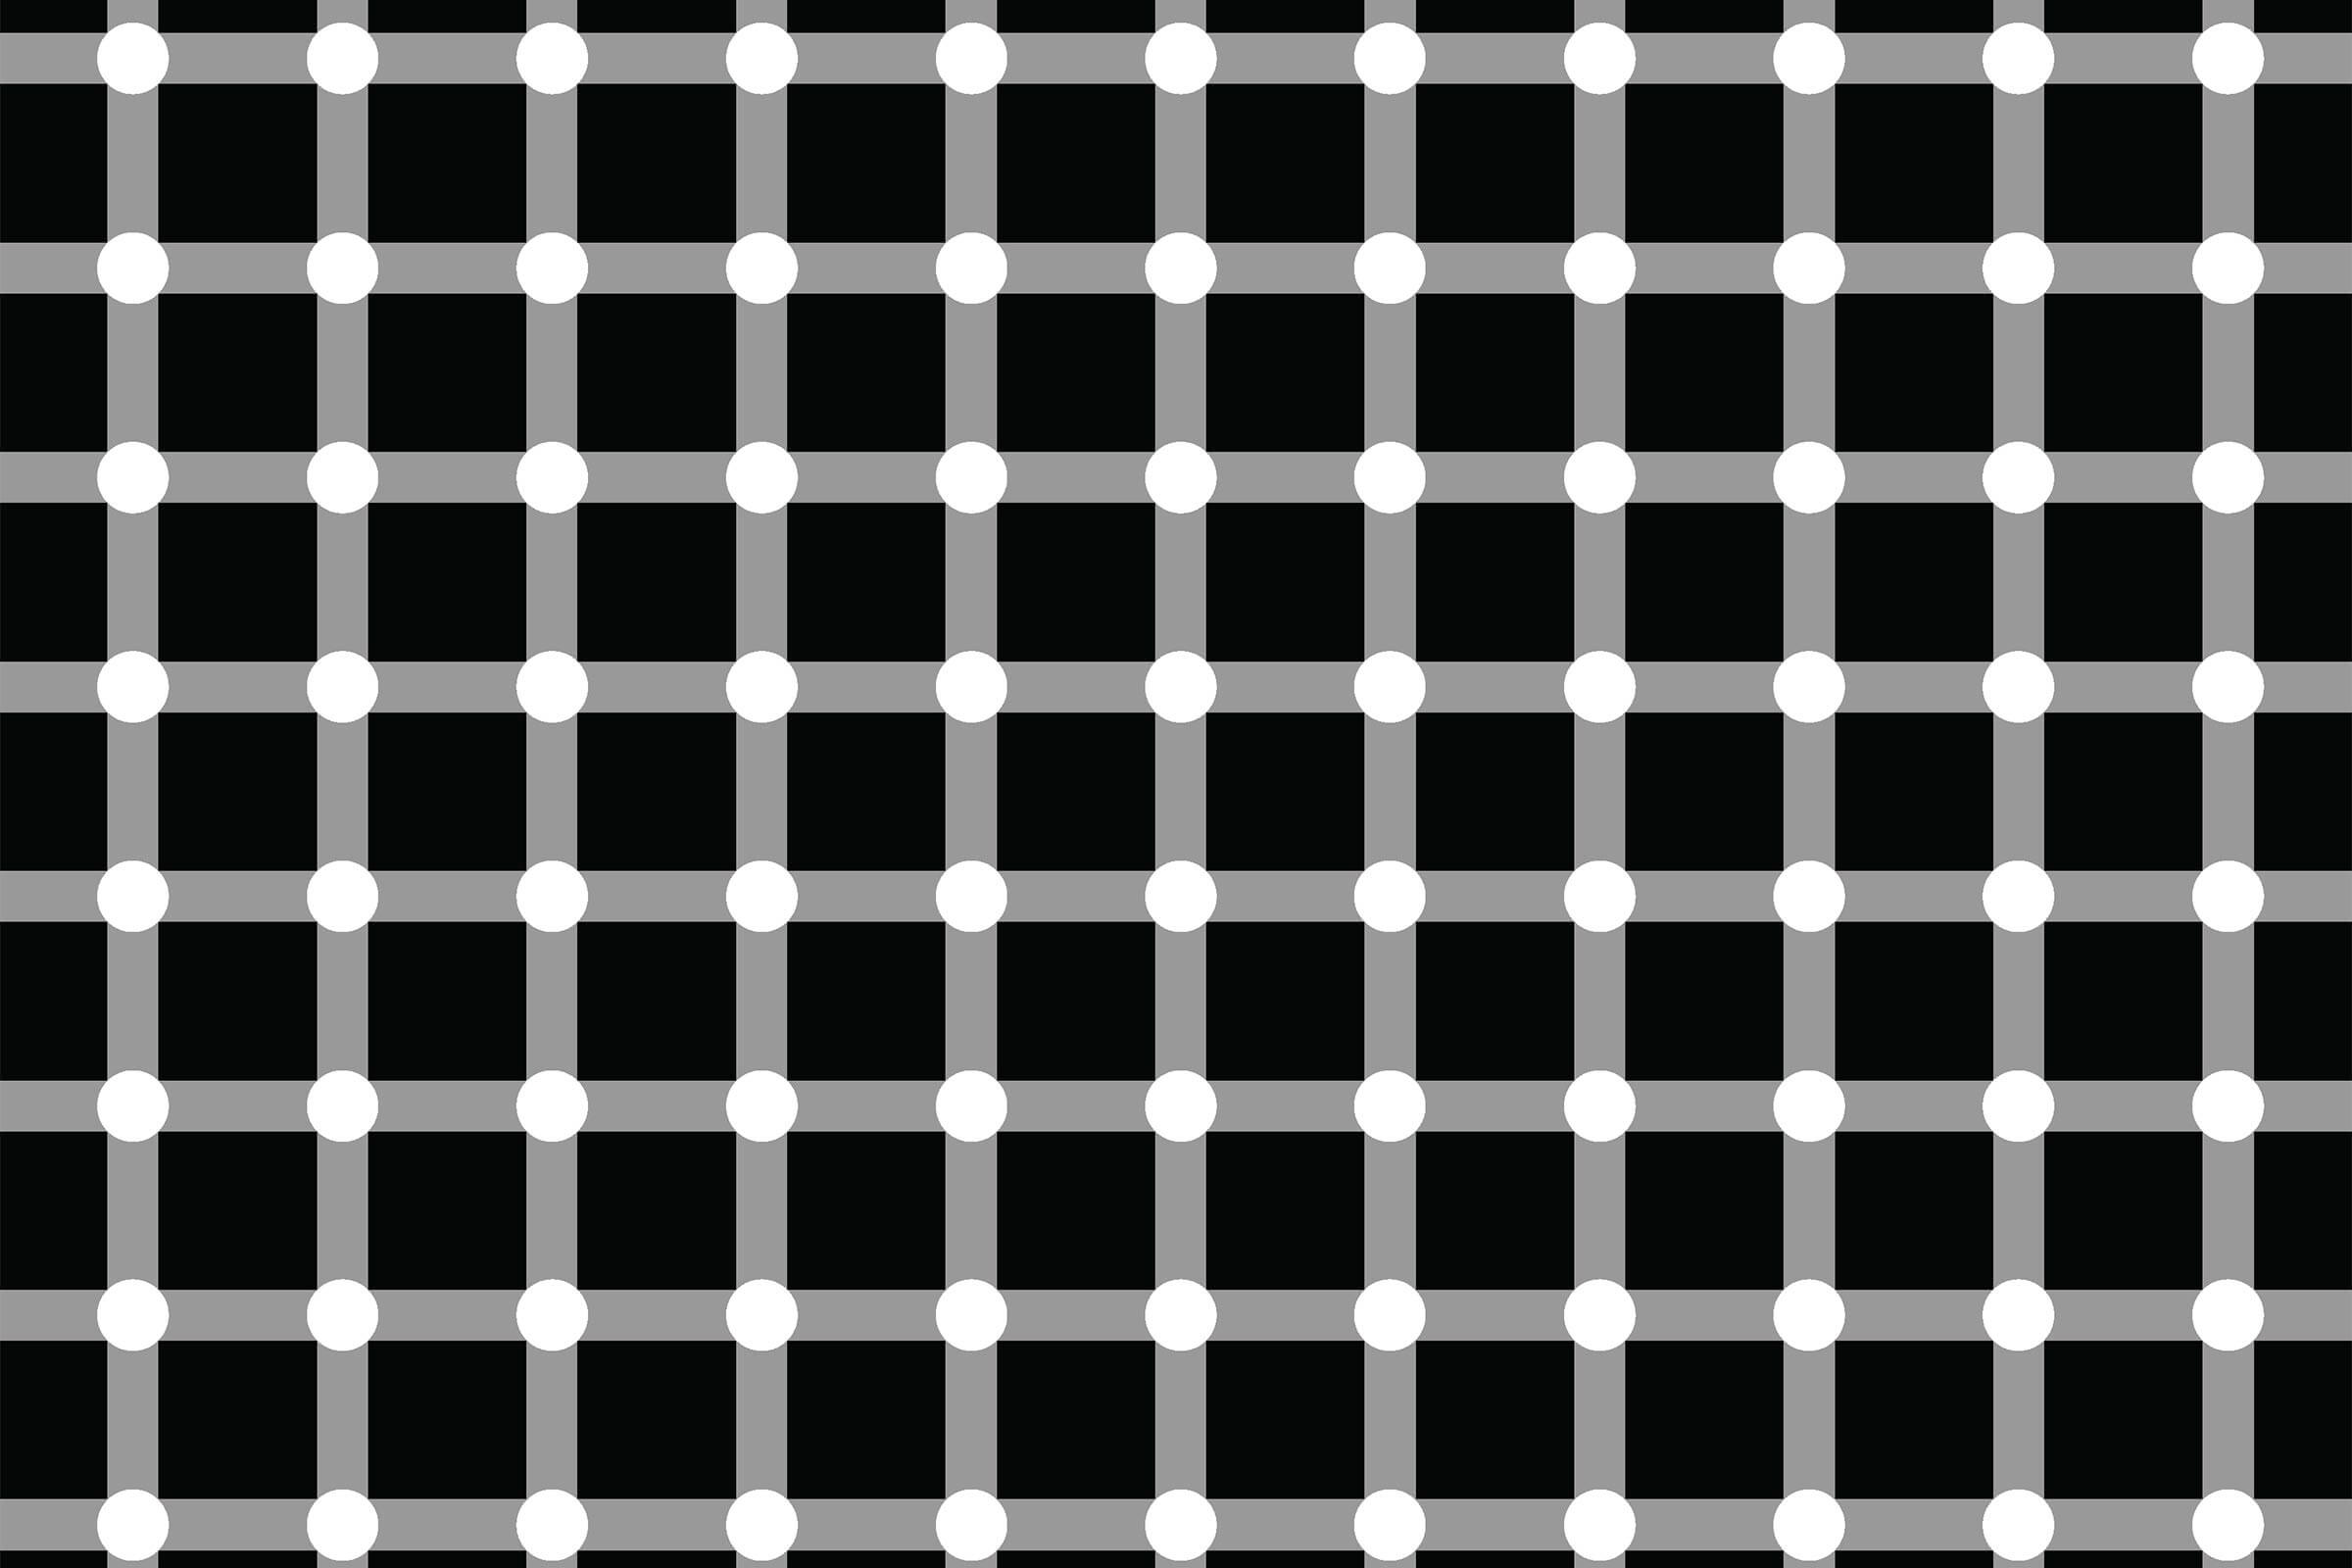 Optical Illusions That Will Make Your Brain Hurt | Reader's Digest